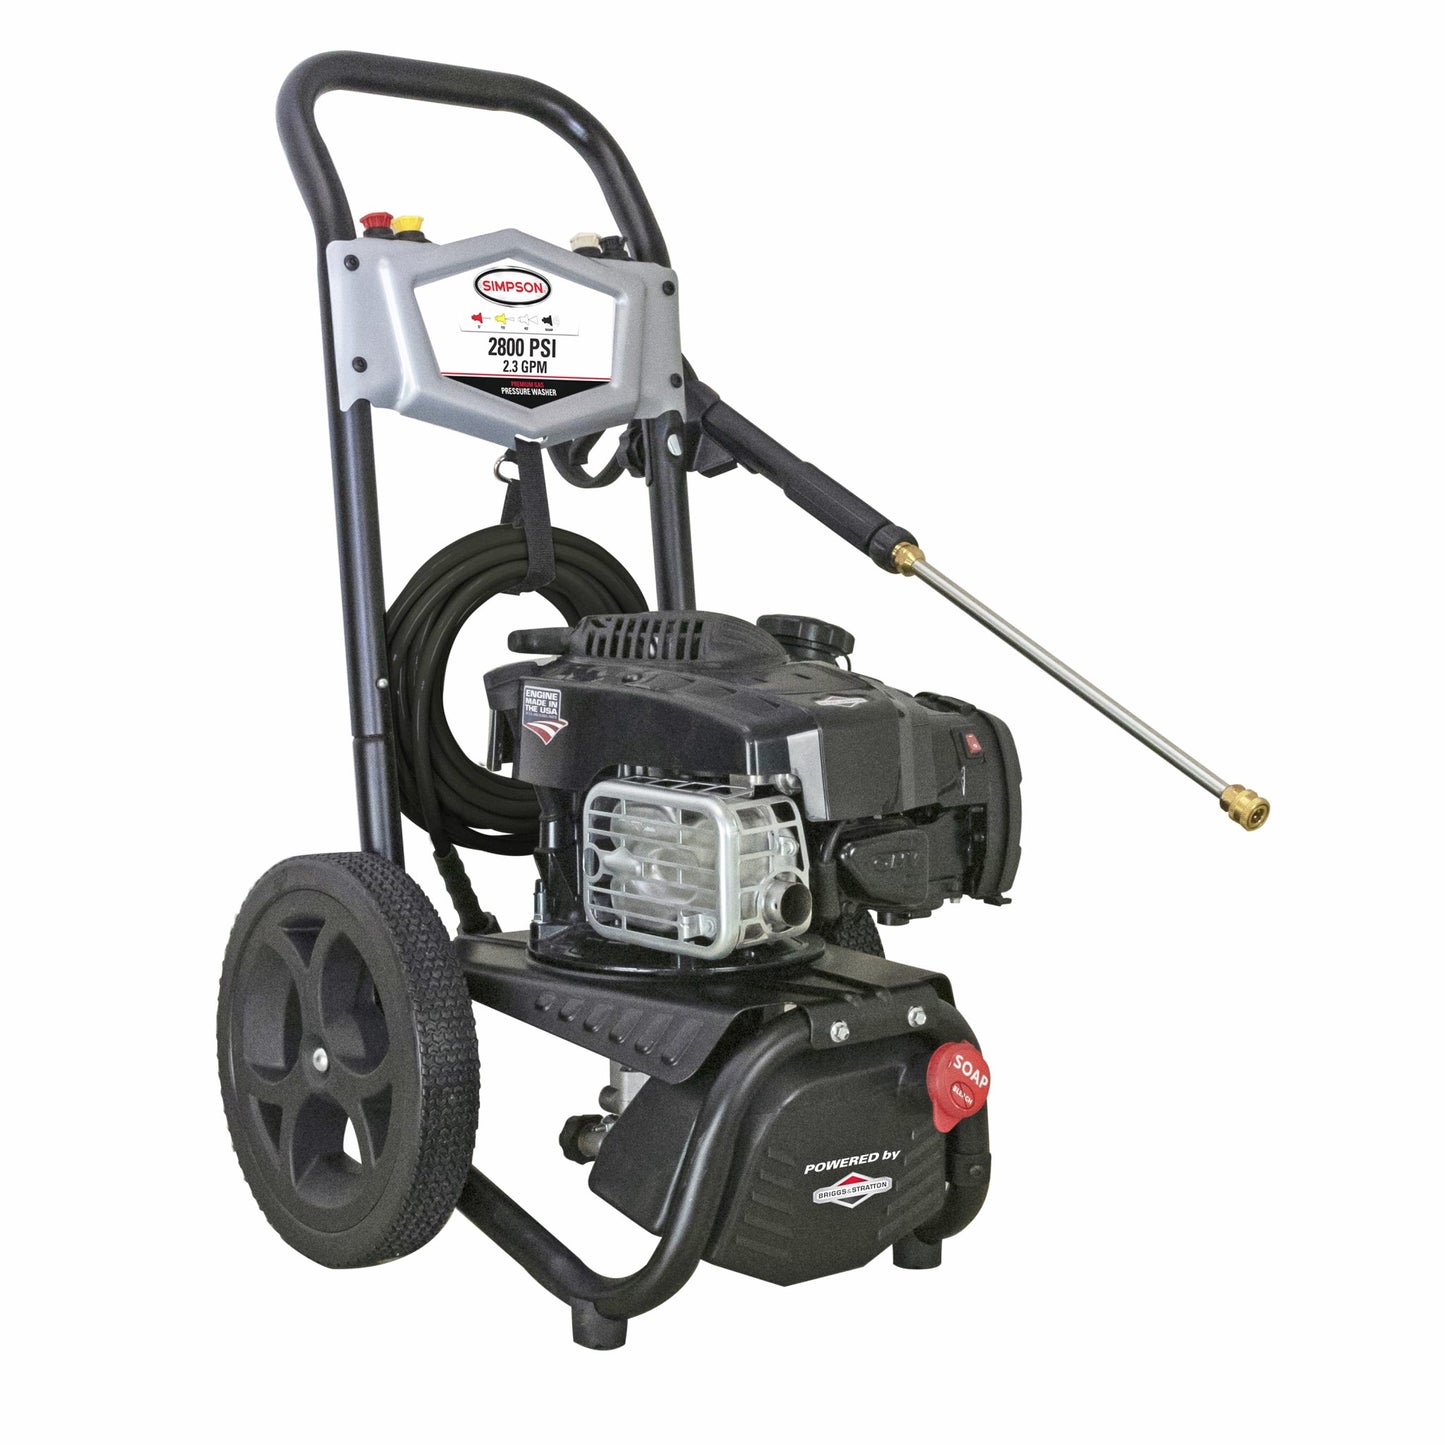 Simpson 2800 PSI at 2.3 GPM Briggs and Stratton Axial Cam Pump Cold Water Premium Residential Gas Pressure Washer *Factory Serviced*